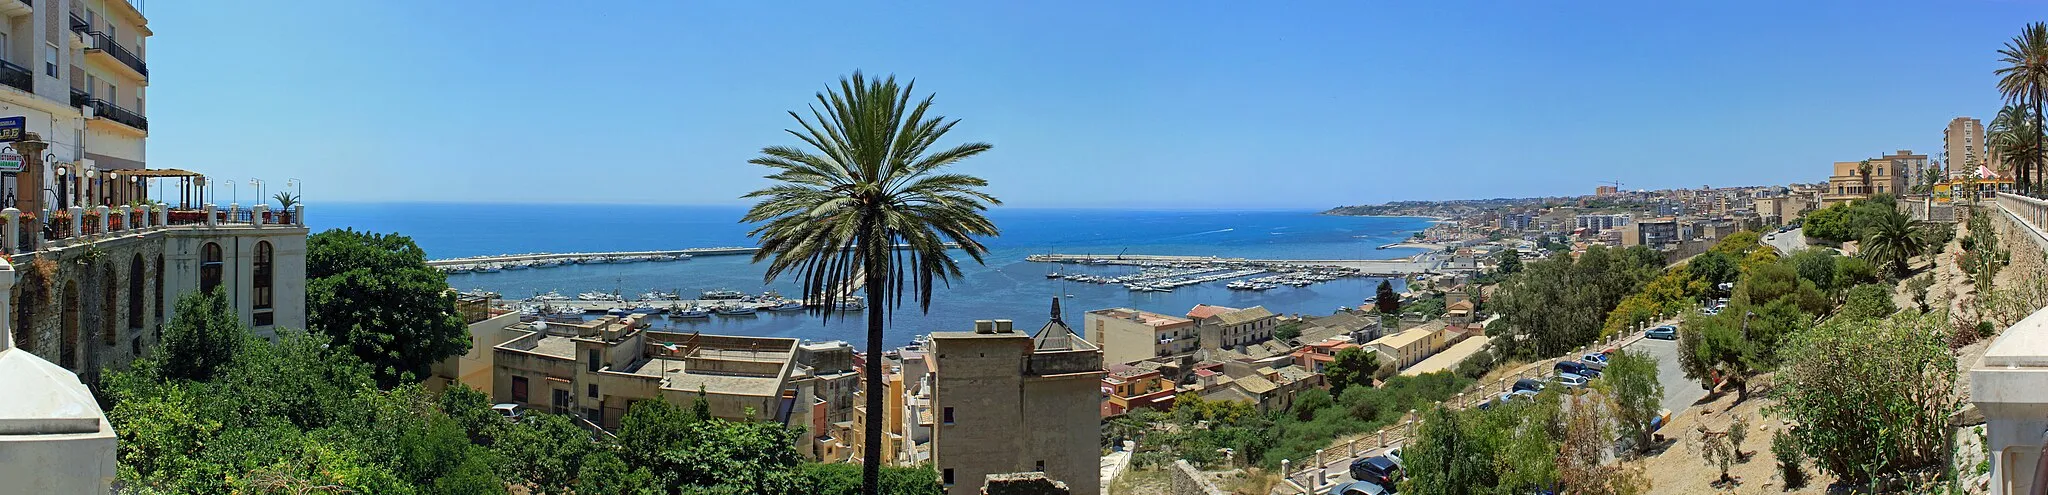 Photo showing: Seaview from center place of Sciacca